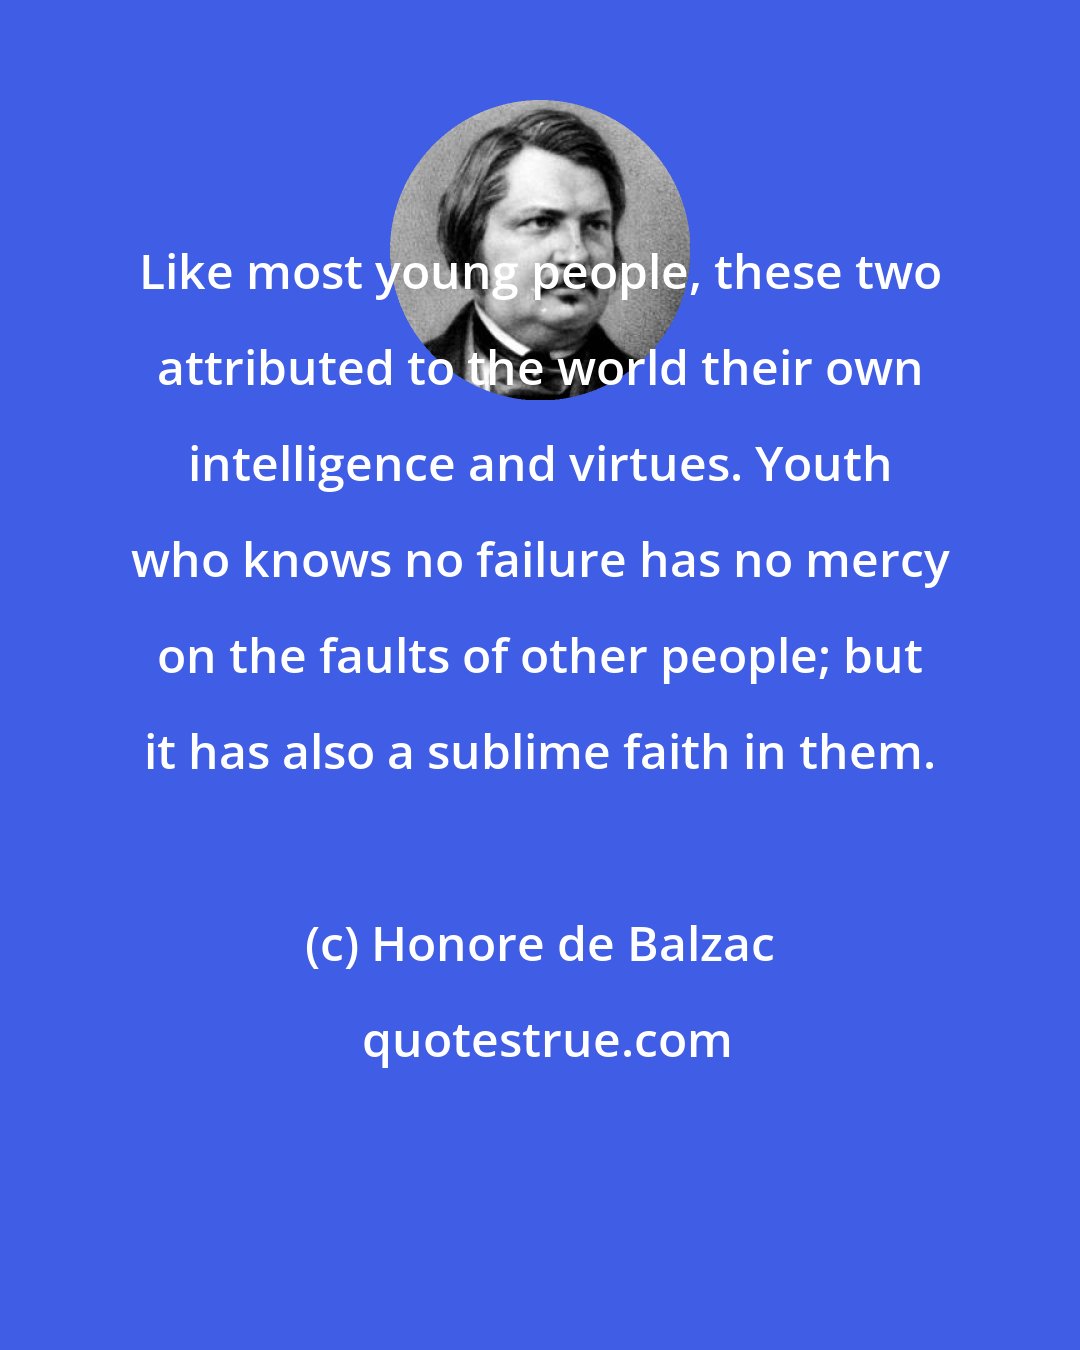 Honore de Balzac: Like most young people, these two attributed to the world their own intelligence and virtues. Youth who knows no failure has no mercy on the faults of other people; but it has also a sublime faith in them.